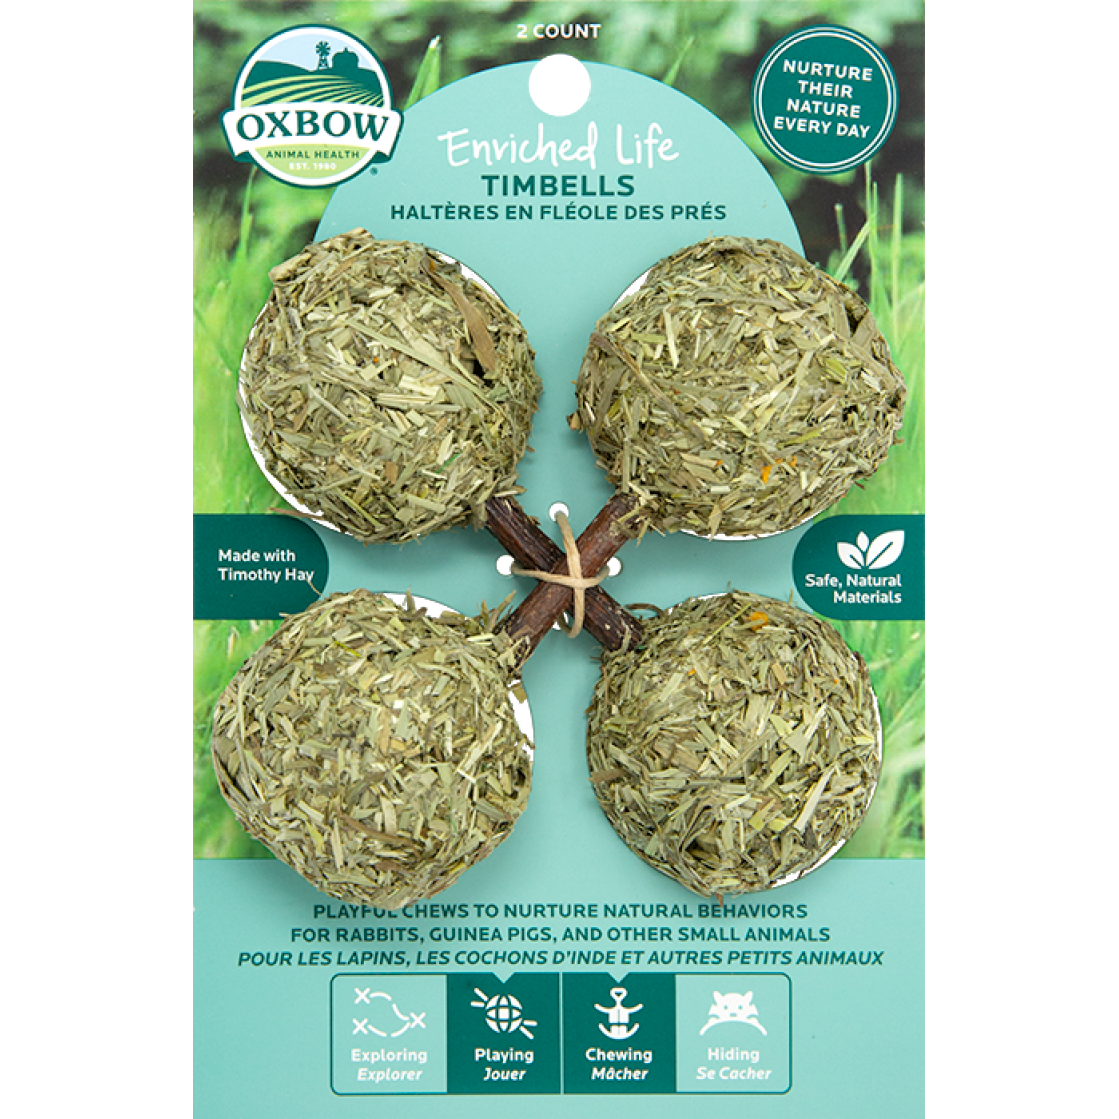 Oxbow Enriched Life Hay Chew Treats - Timbells